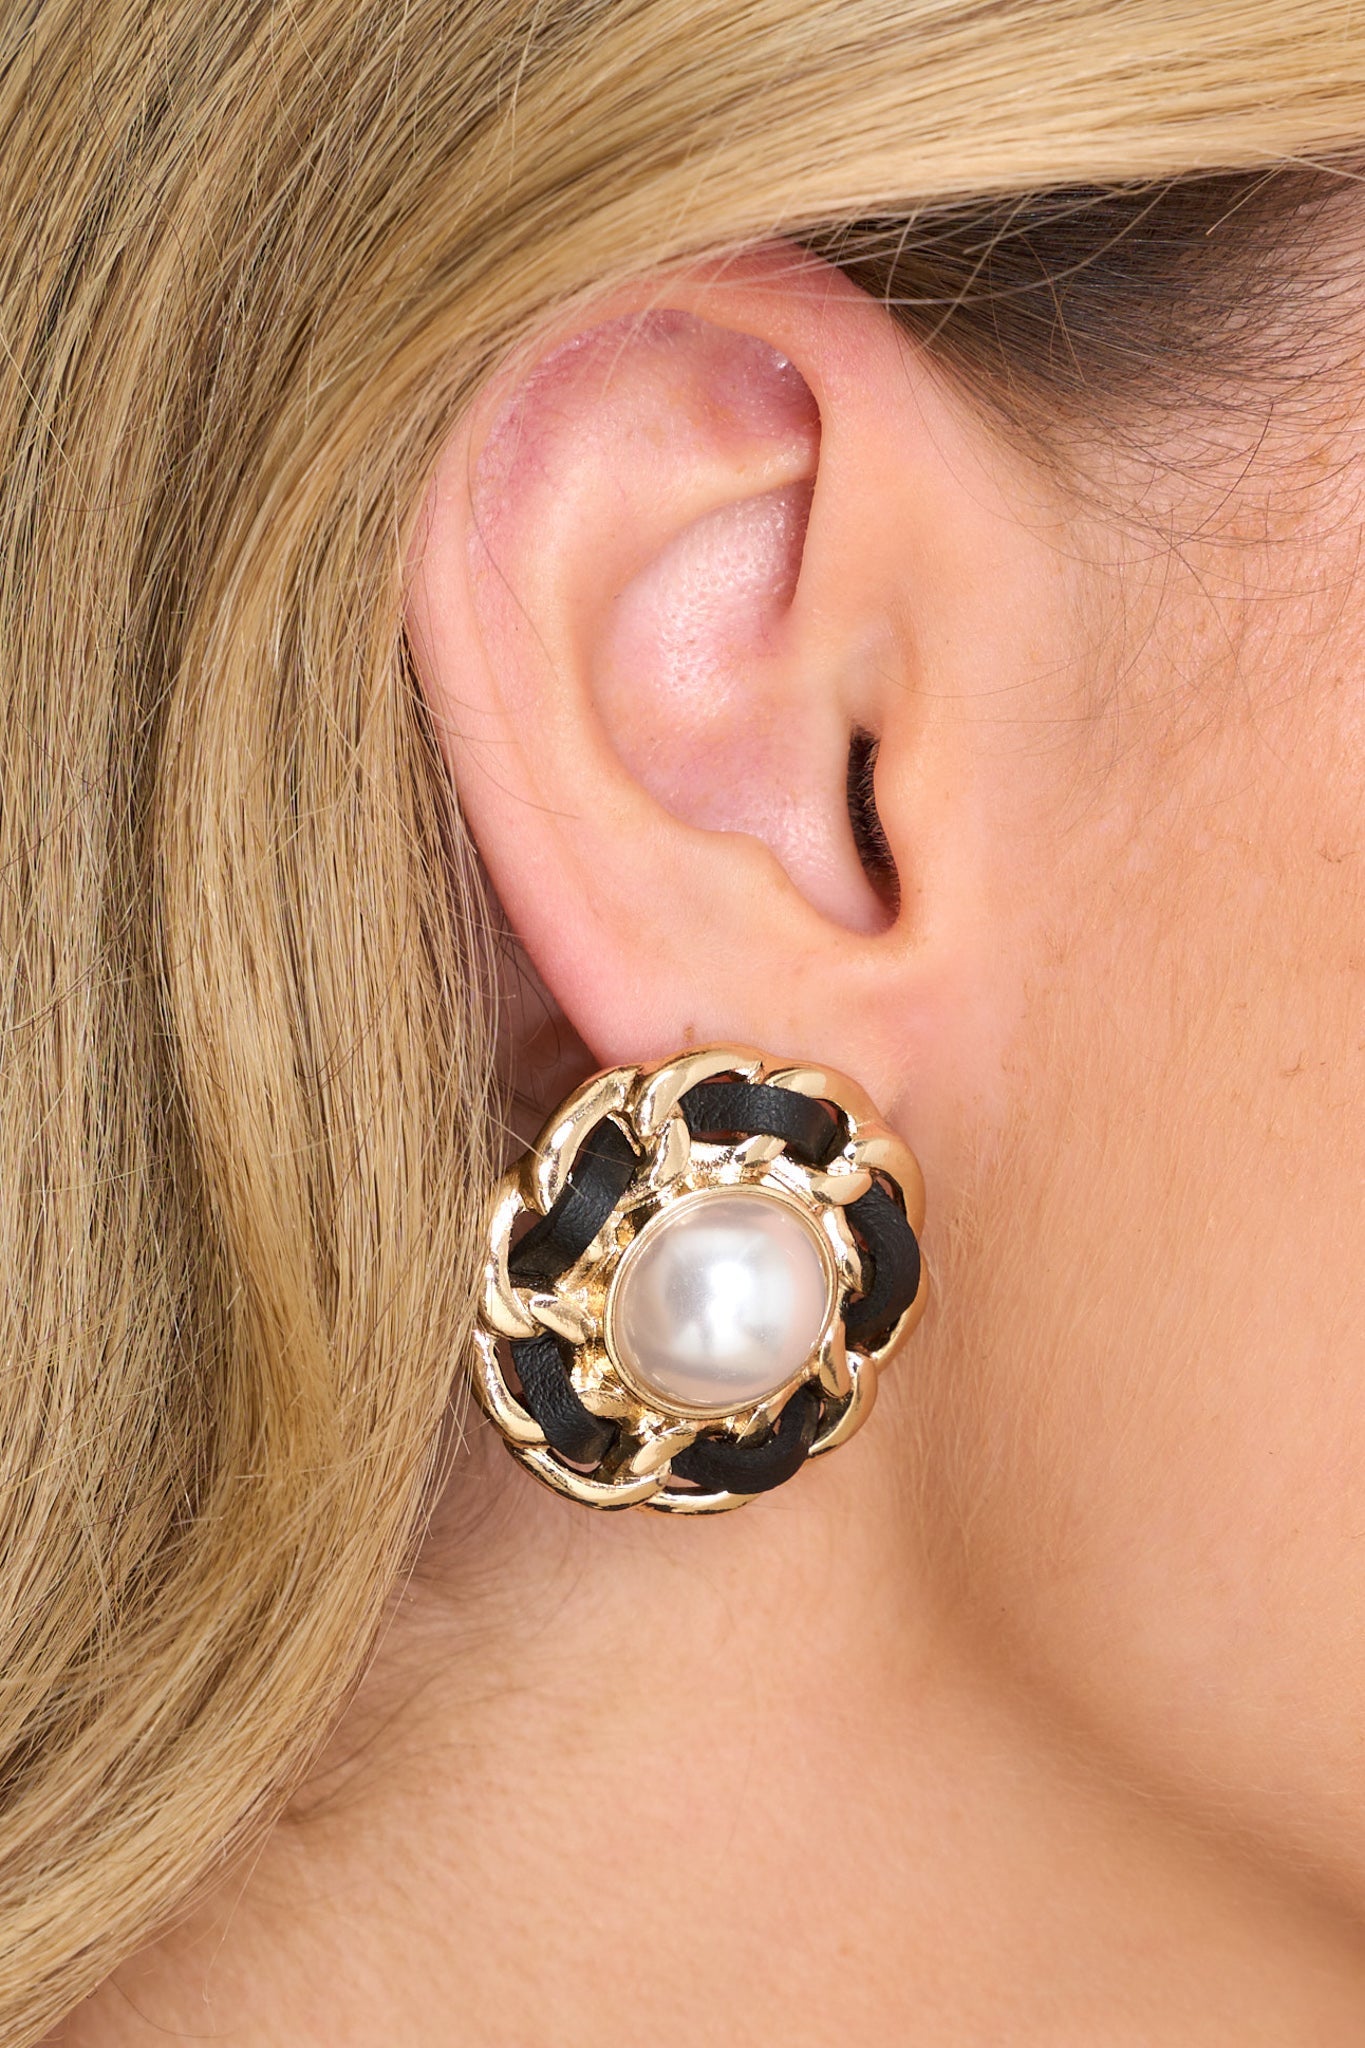 Daydreams To Reality Pearl Earrings